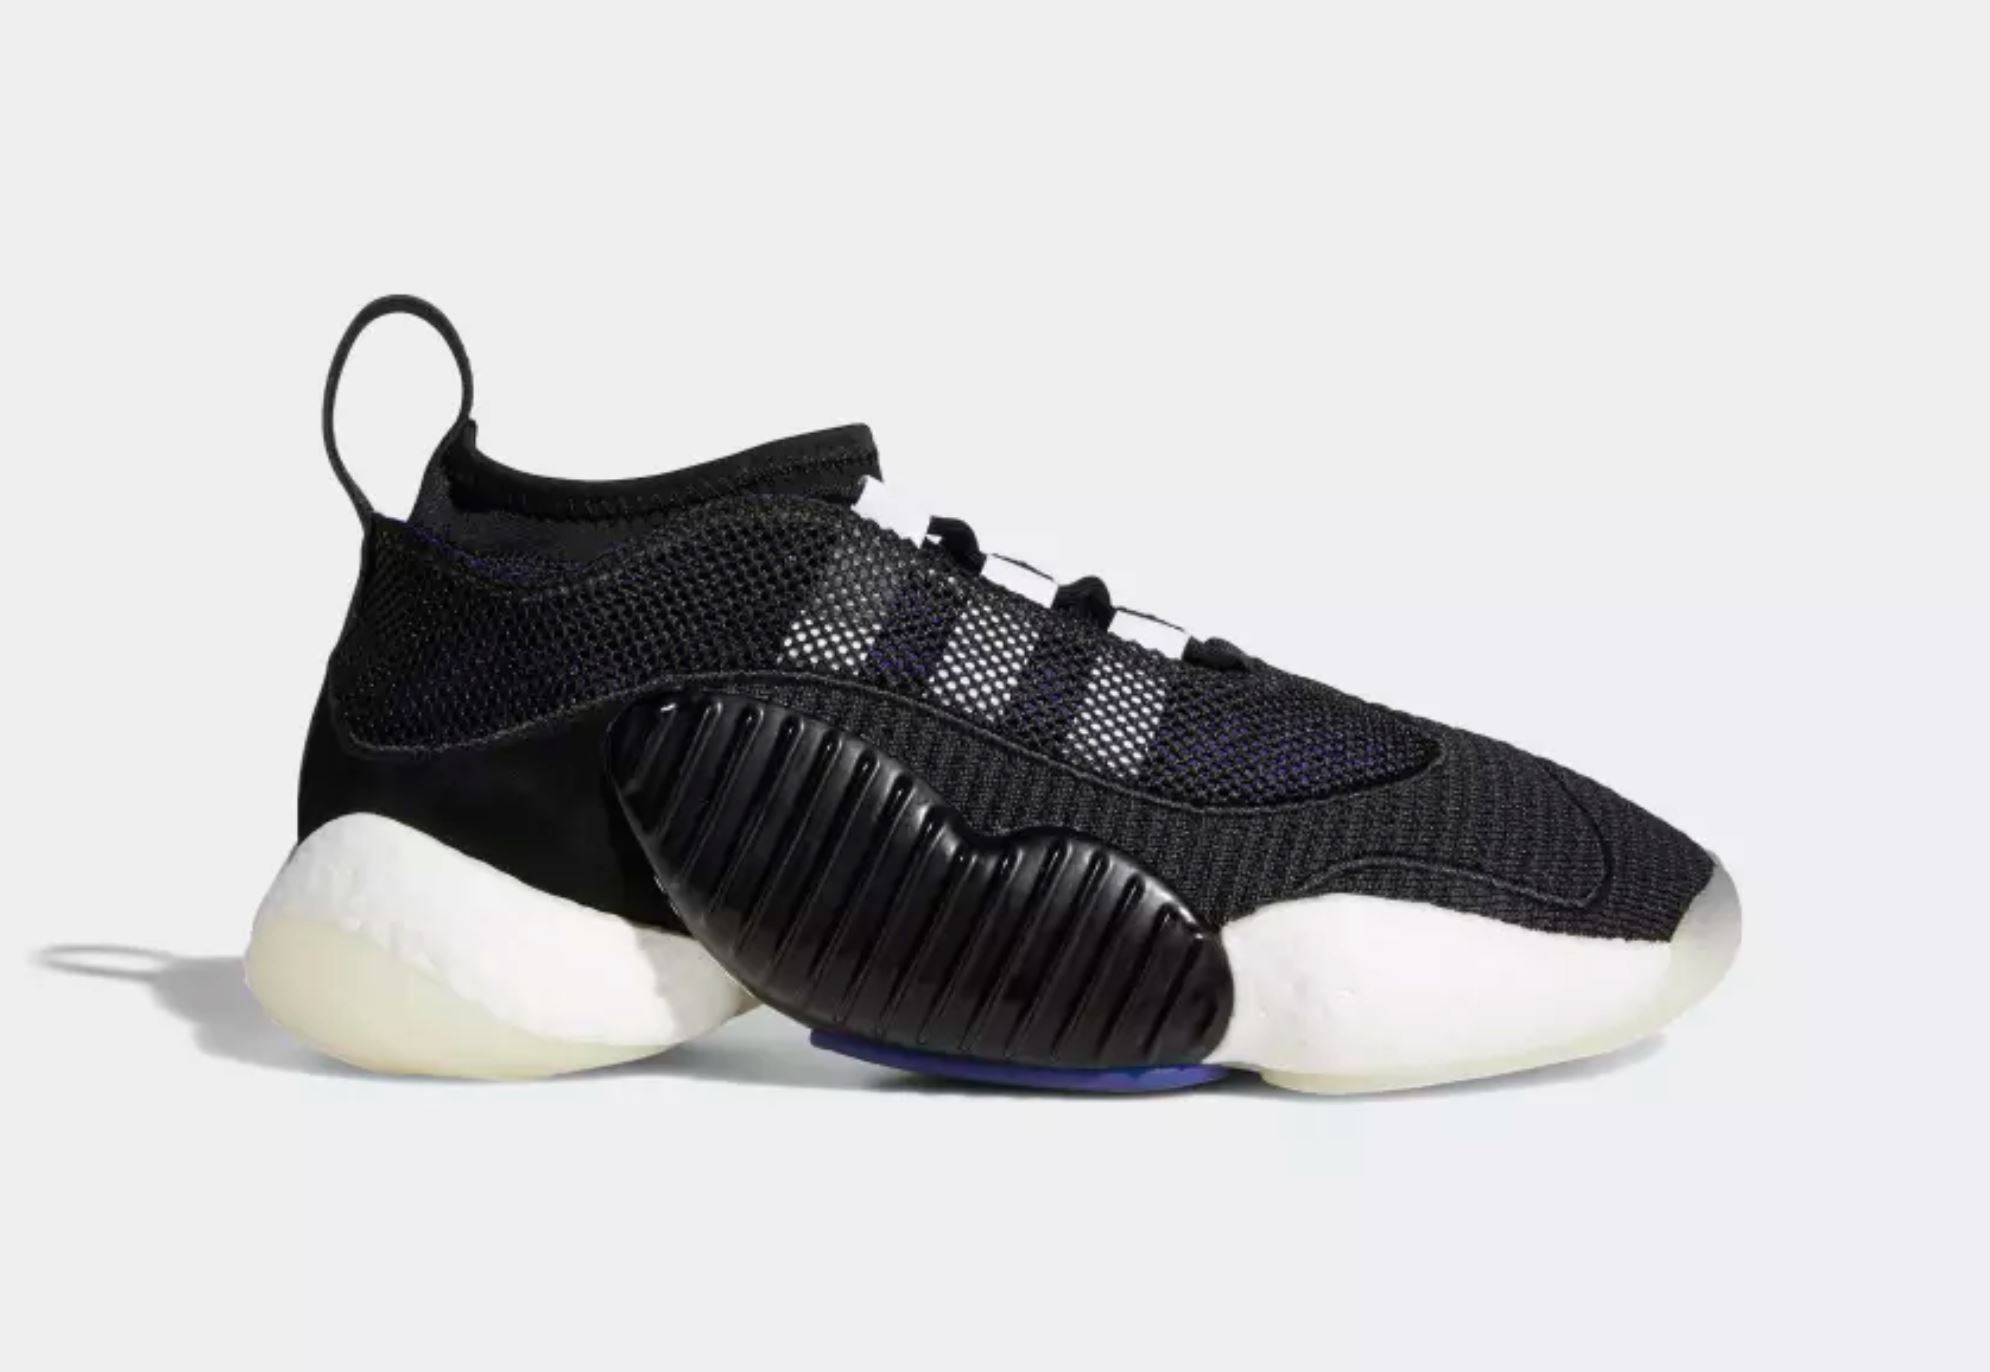 adidas crazy byw II release date